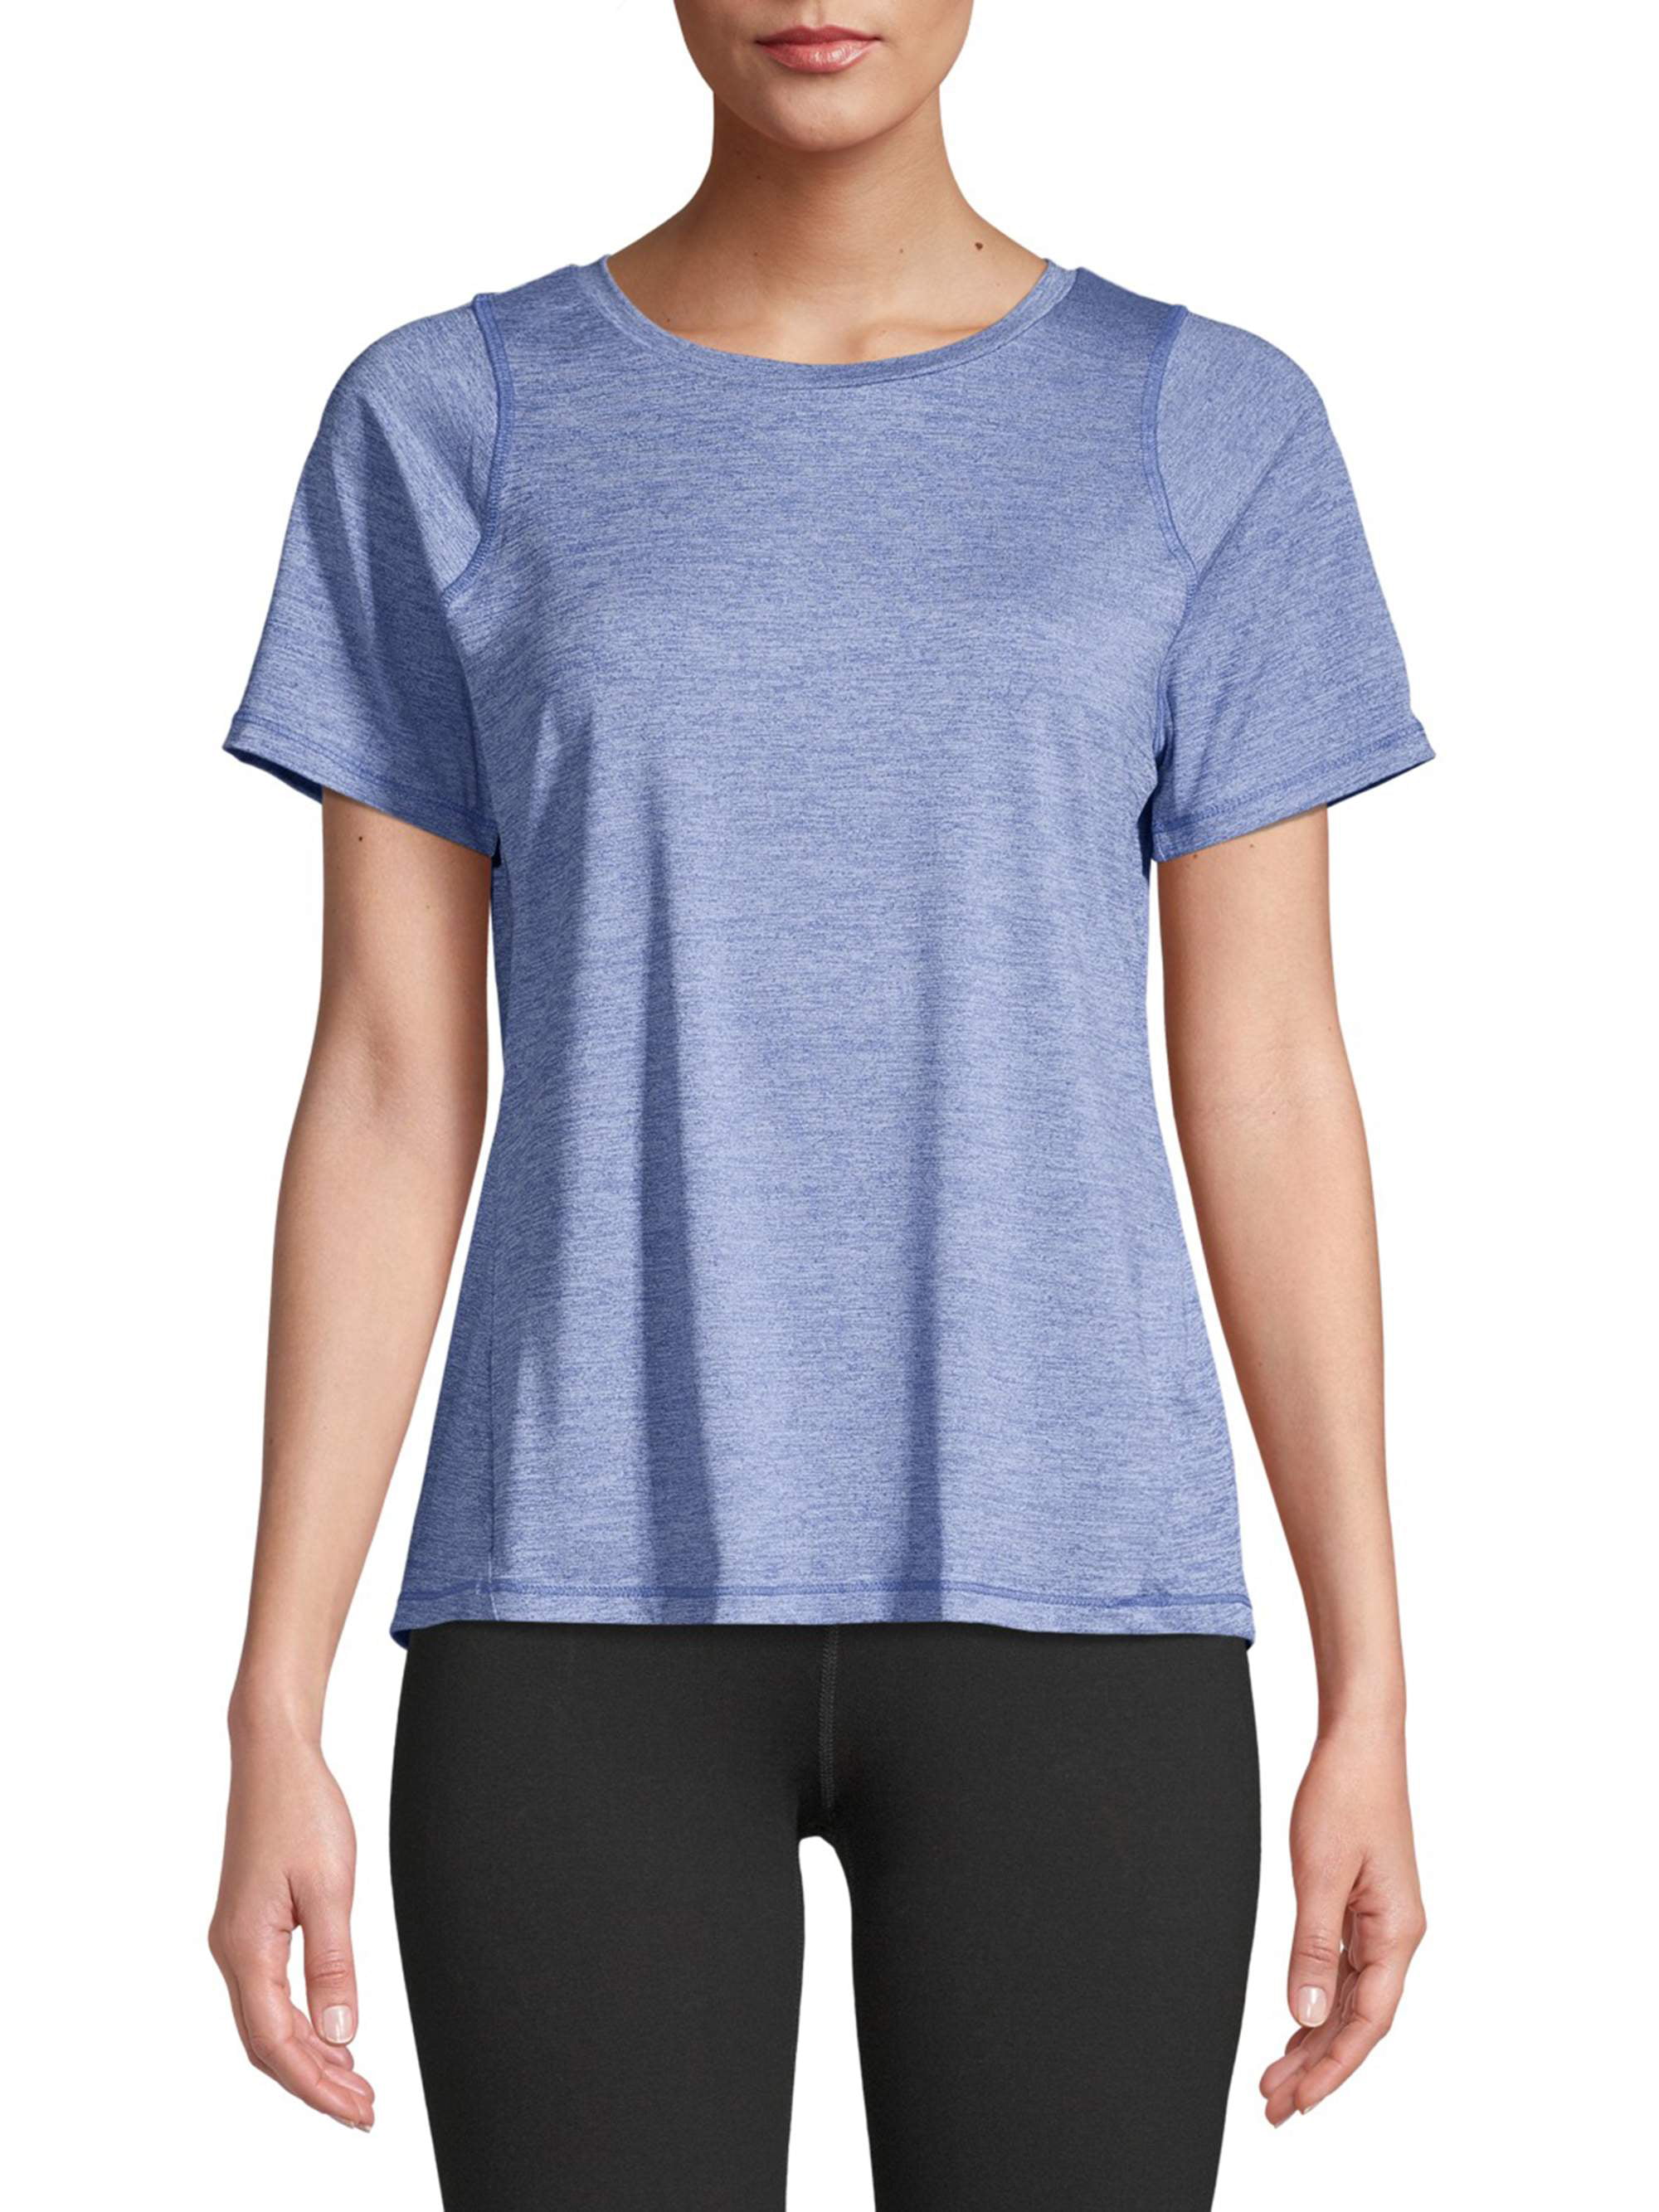 athletic works shirts womens